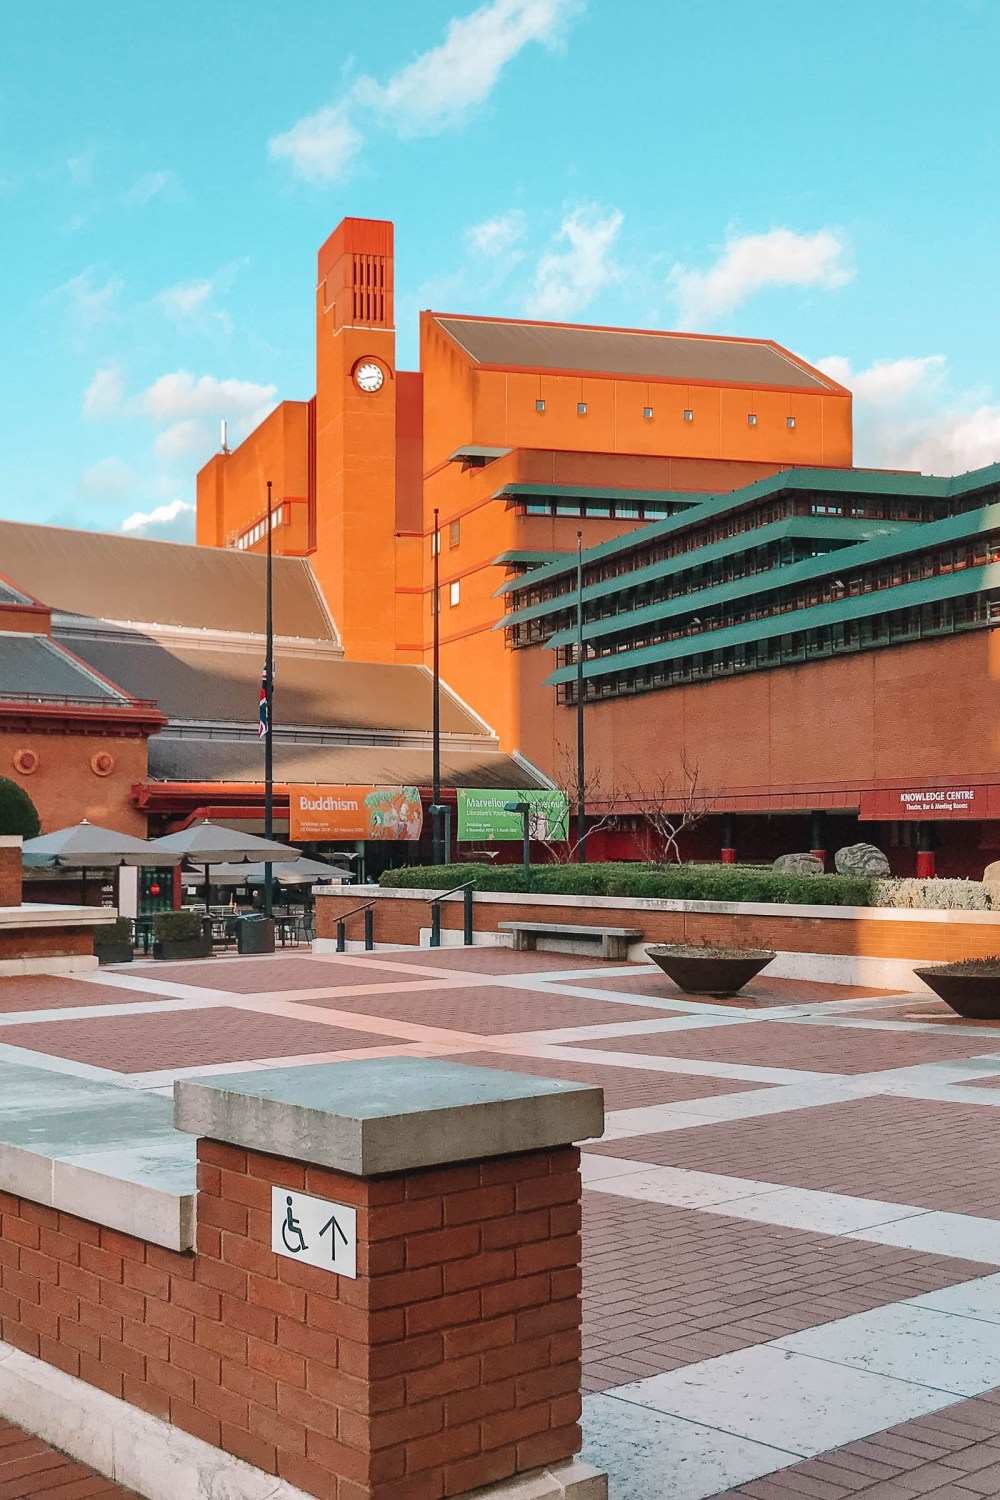 British Library in London